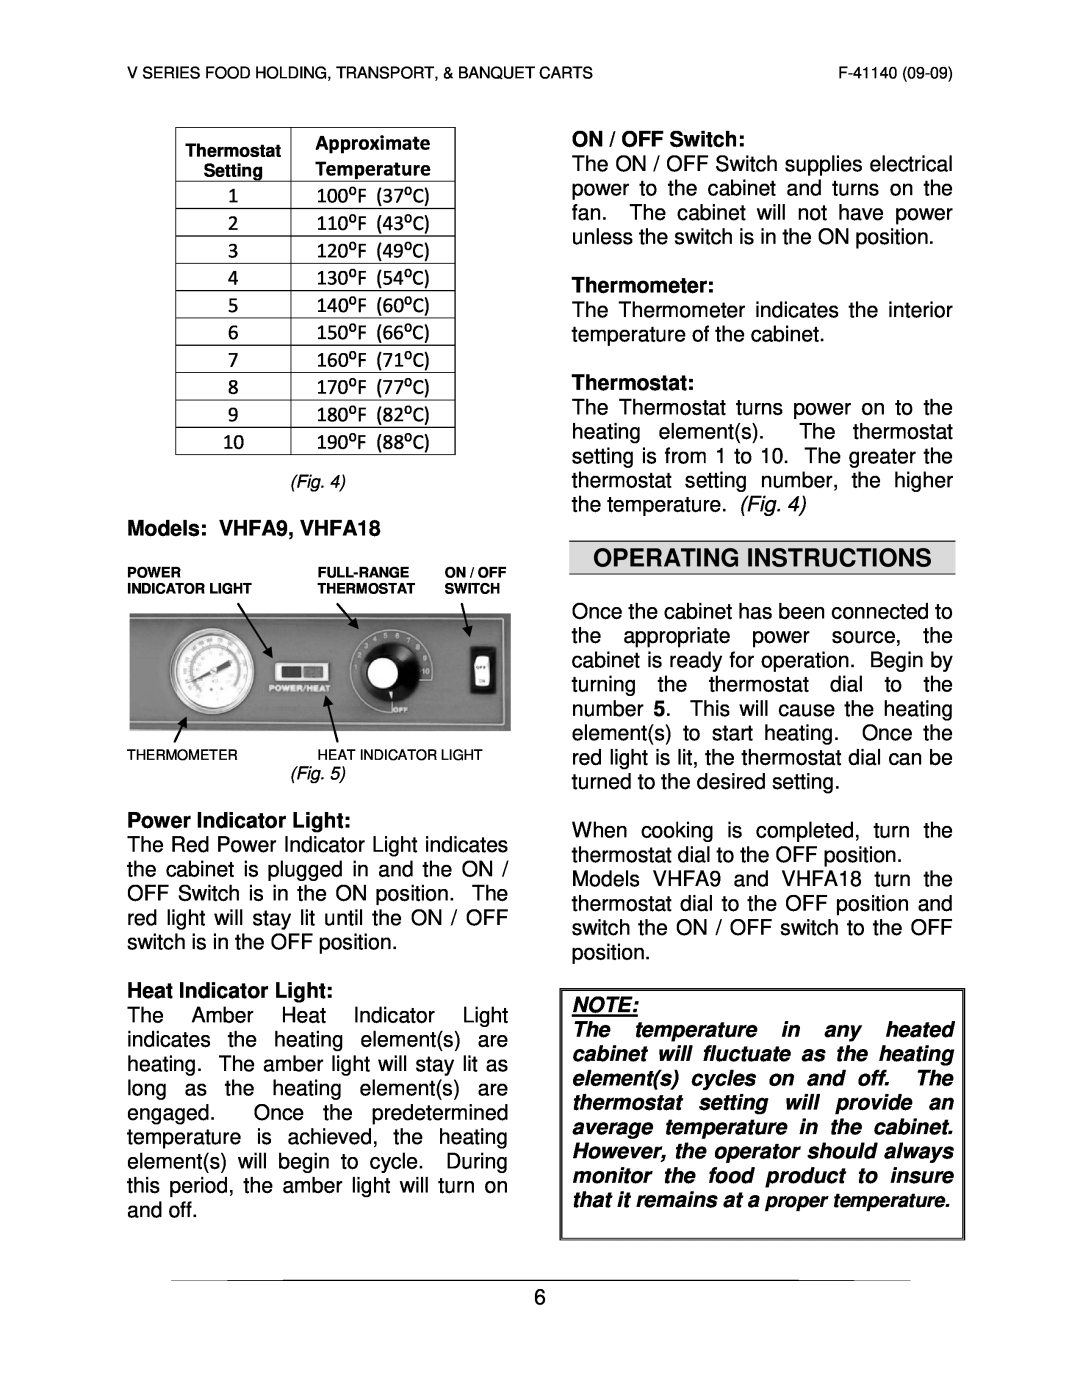 Vulcan-Hart VBS15 ML-138033 Approximate, Temperature, Models VHFA9, VHFA18, ON / OFF Switch, Thermometer, Thermostat 